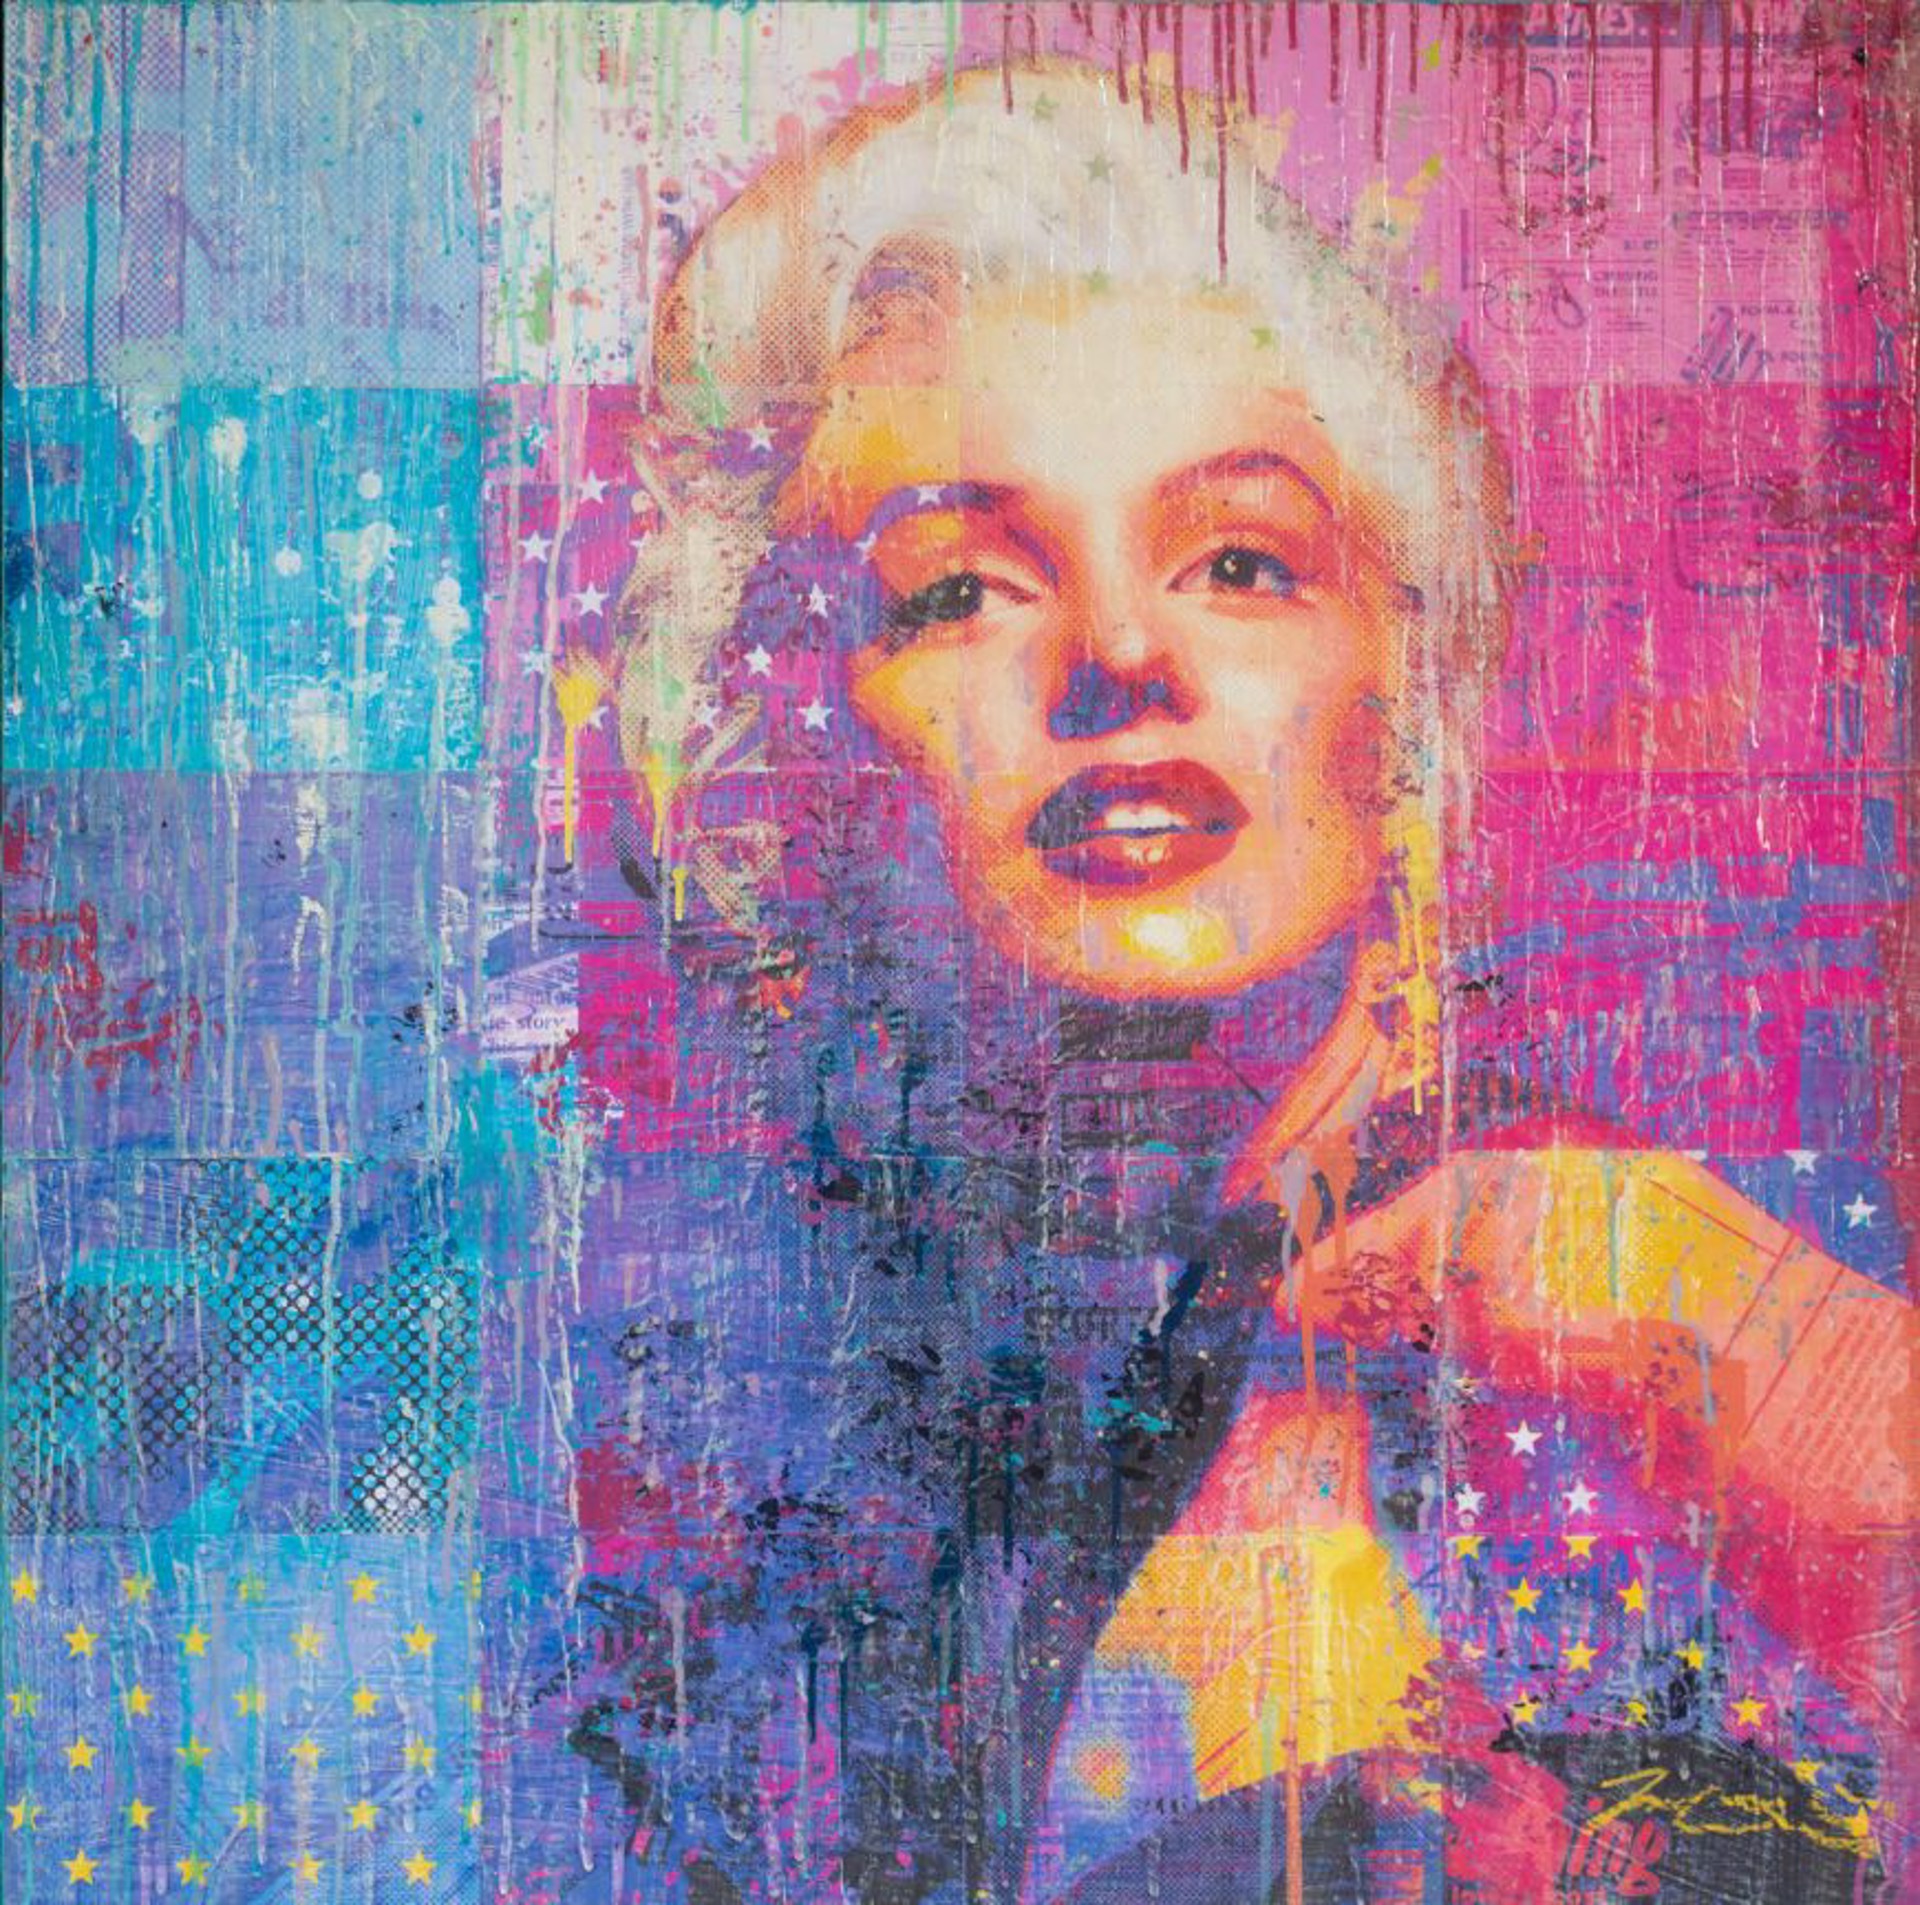 Dreaming of Norma Jean by Jon Davenport